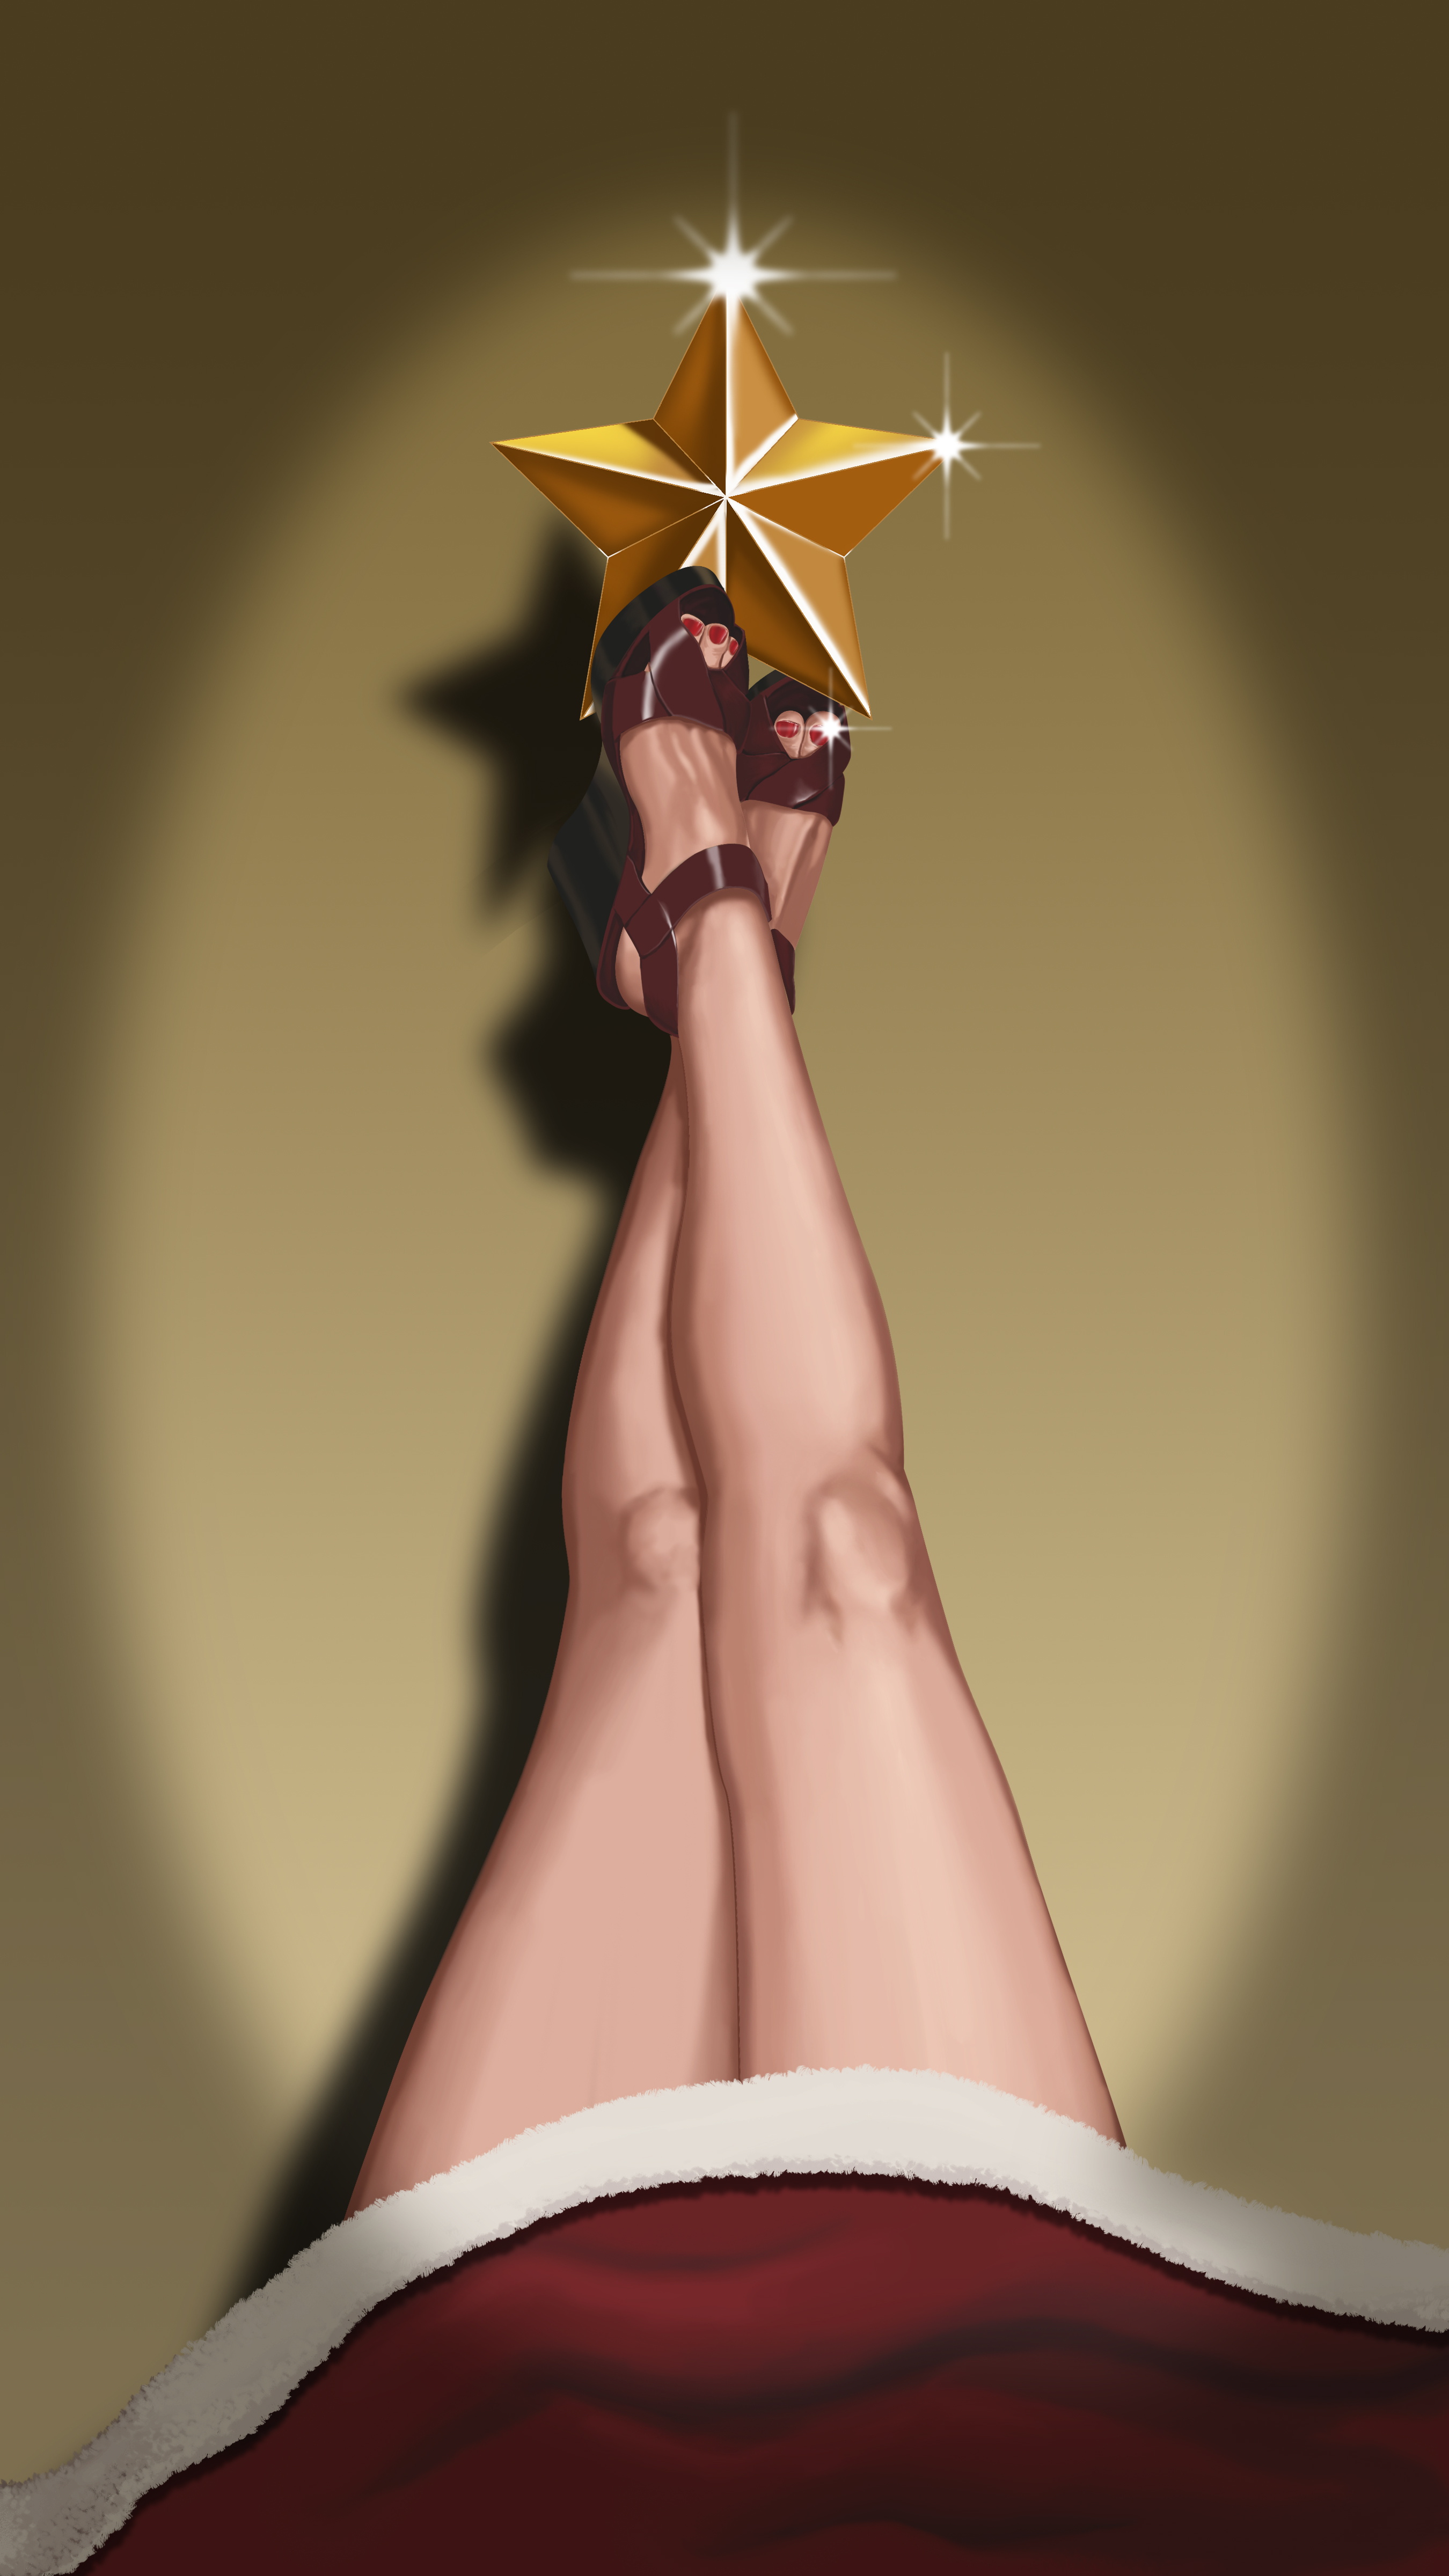 A lovely pair of Holiday legs. Painted in Photoshop.